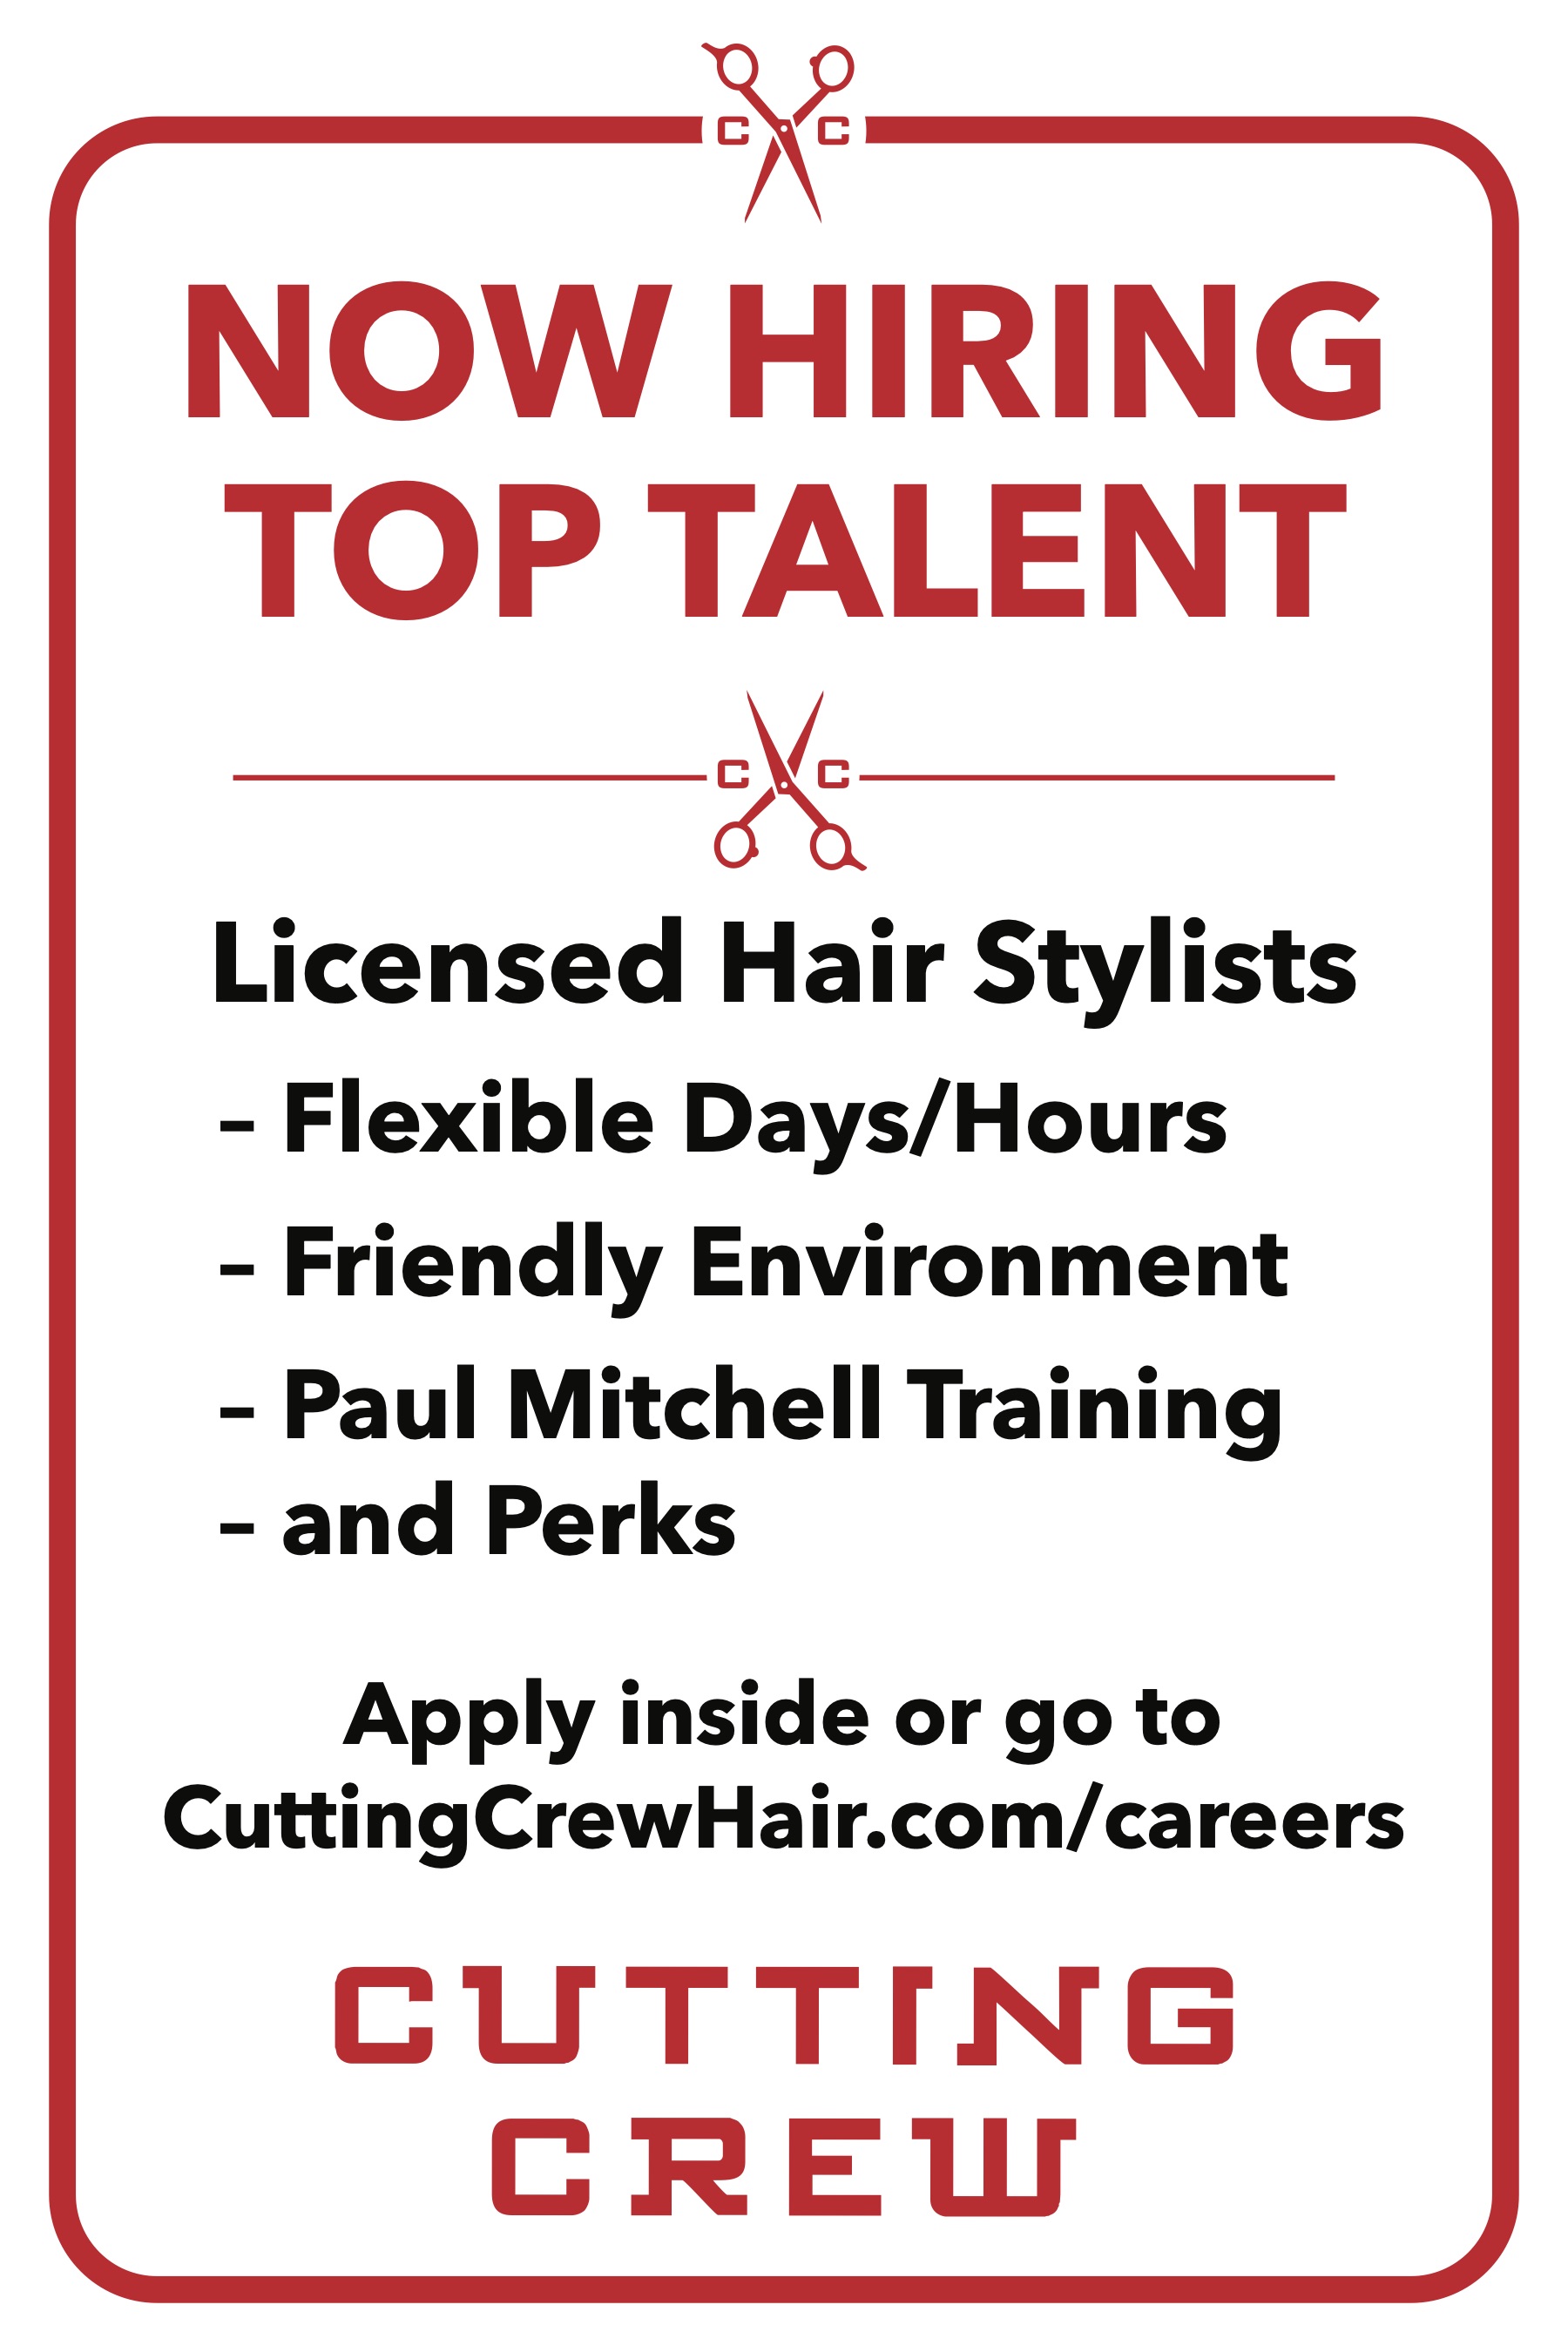 Jump start your career today with the Cutting Crew Hair Salon team and our current employment opportunities in New Milford.